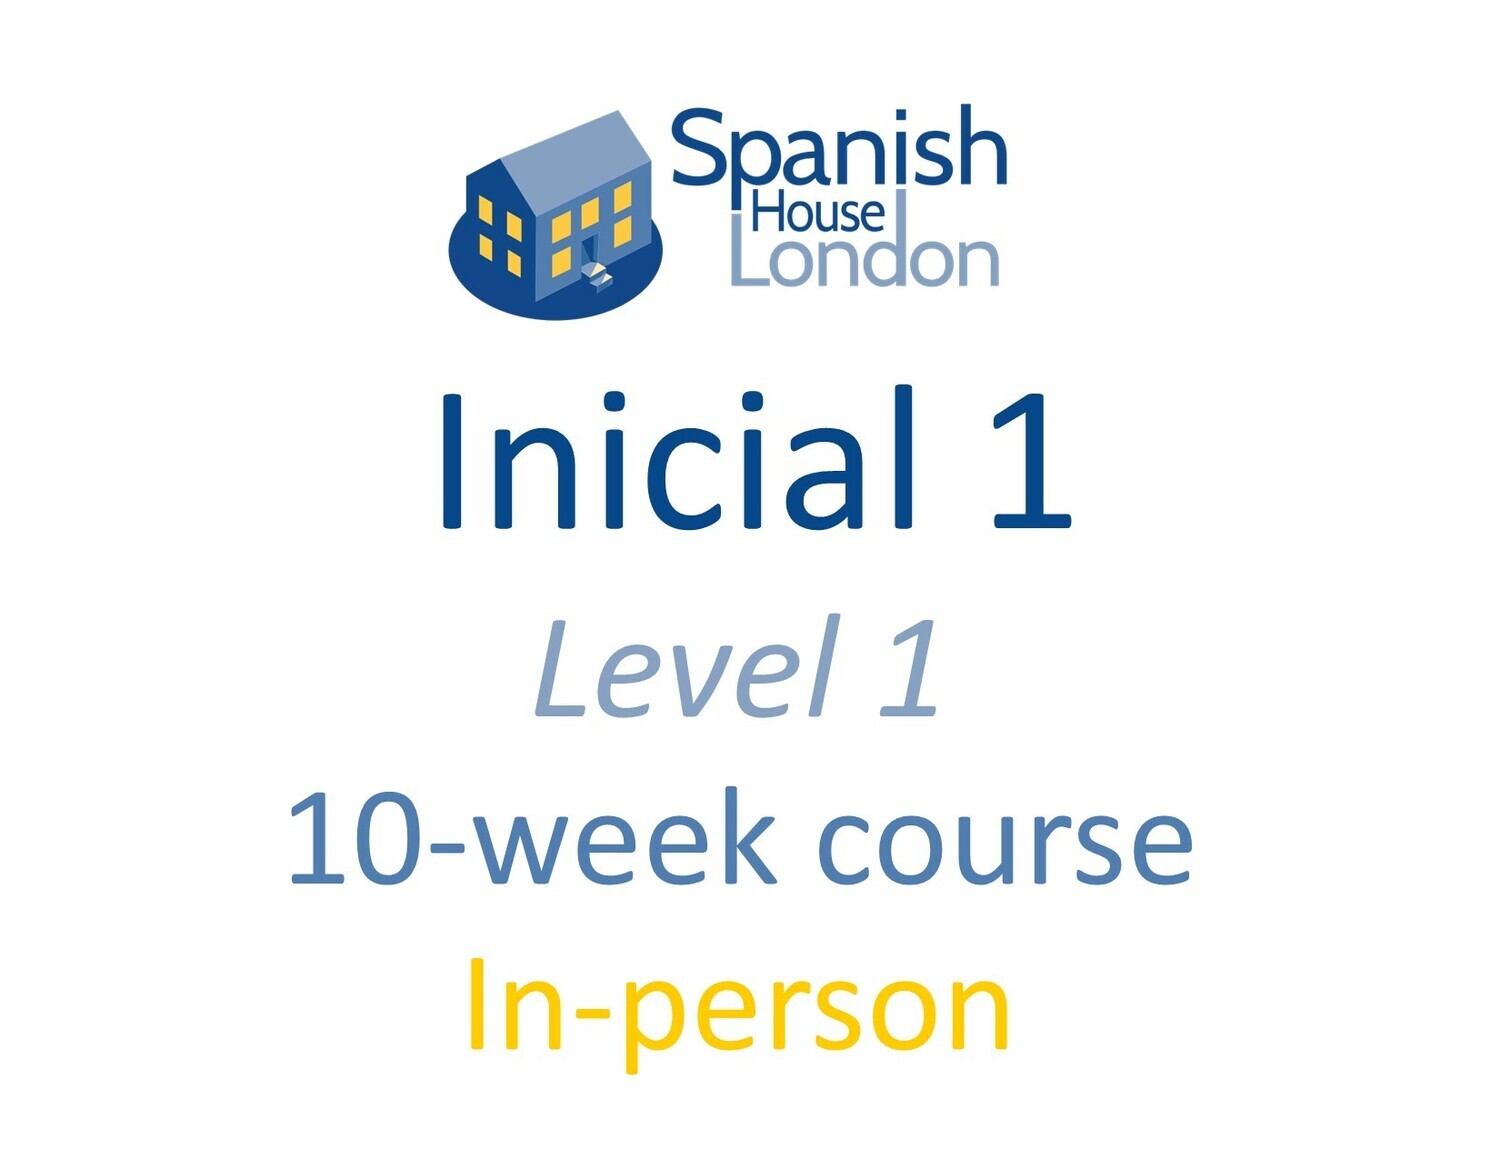 Inicial 1 Course starting on 14th September at 7.30pm in Euston / King's Cross